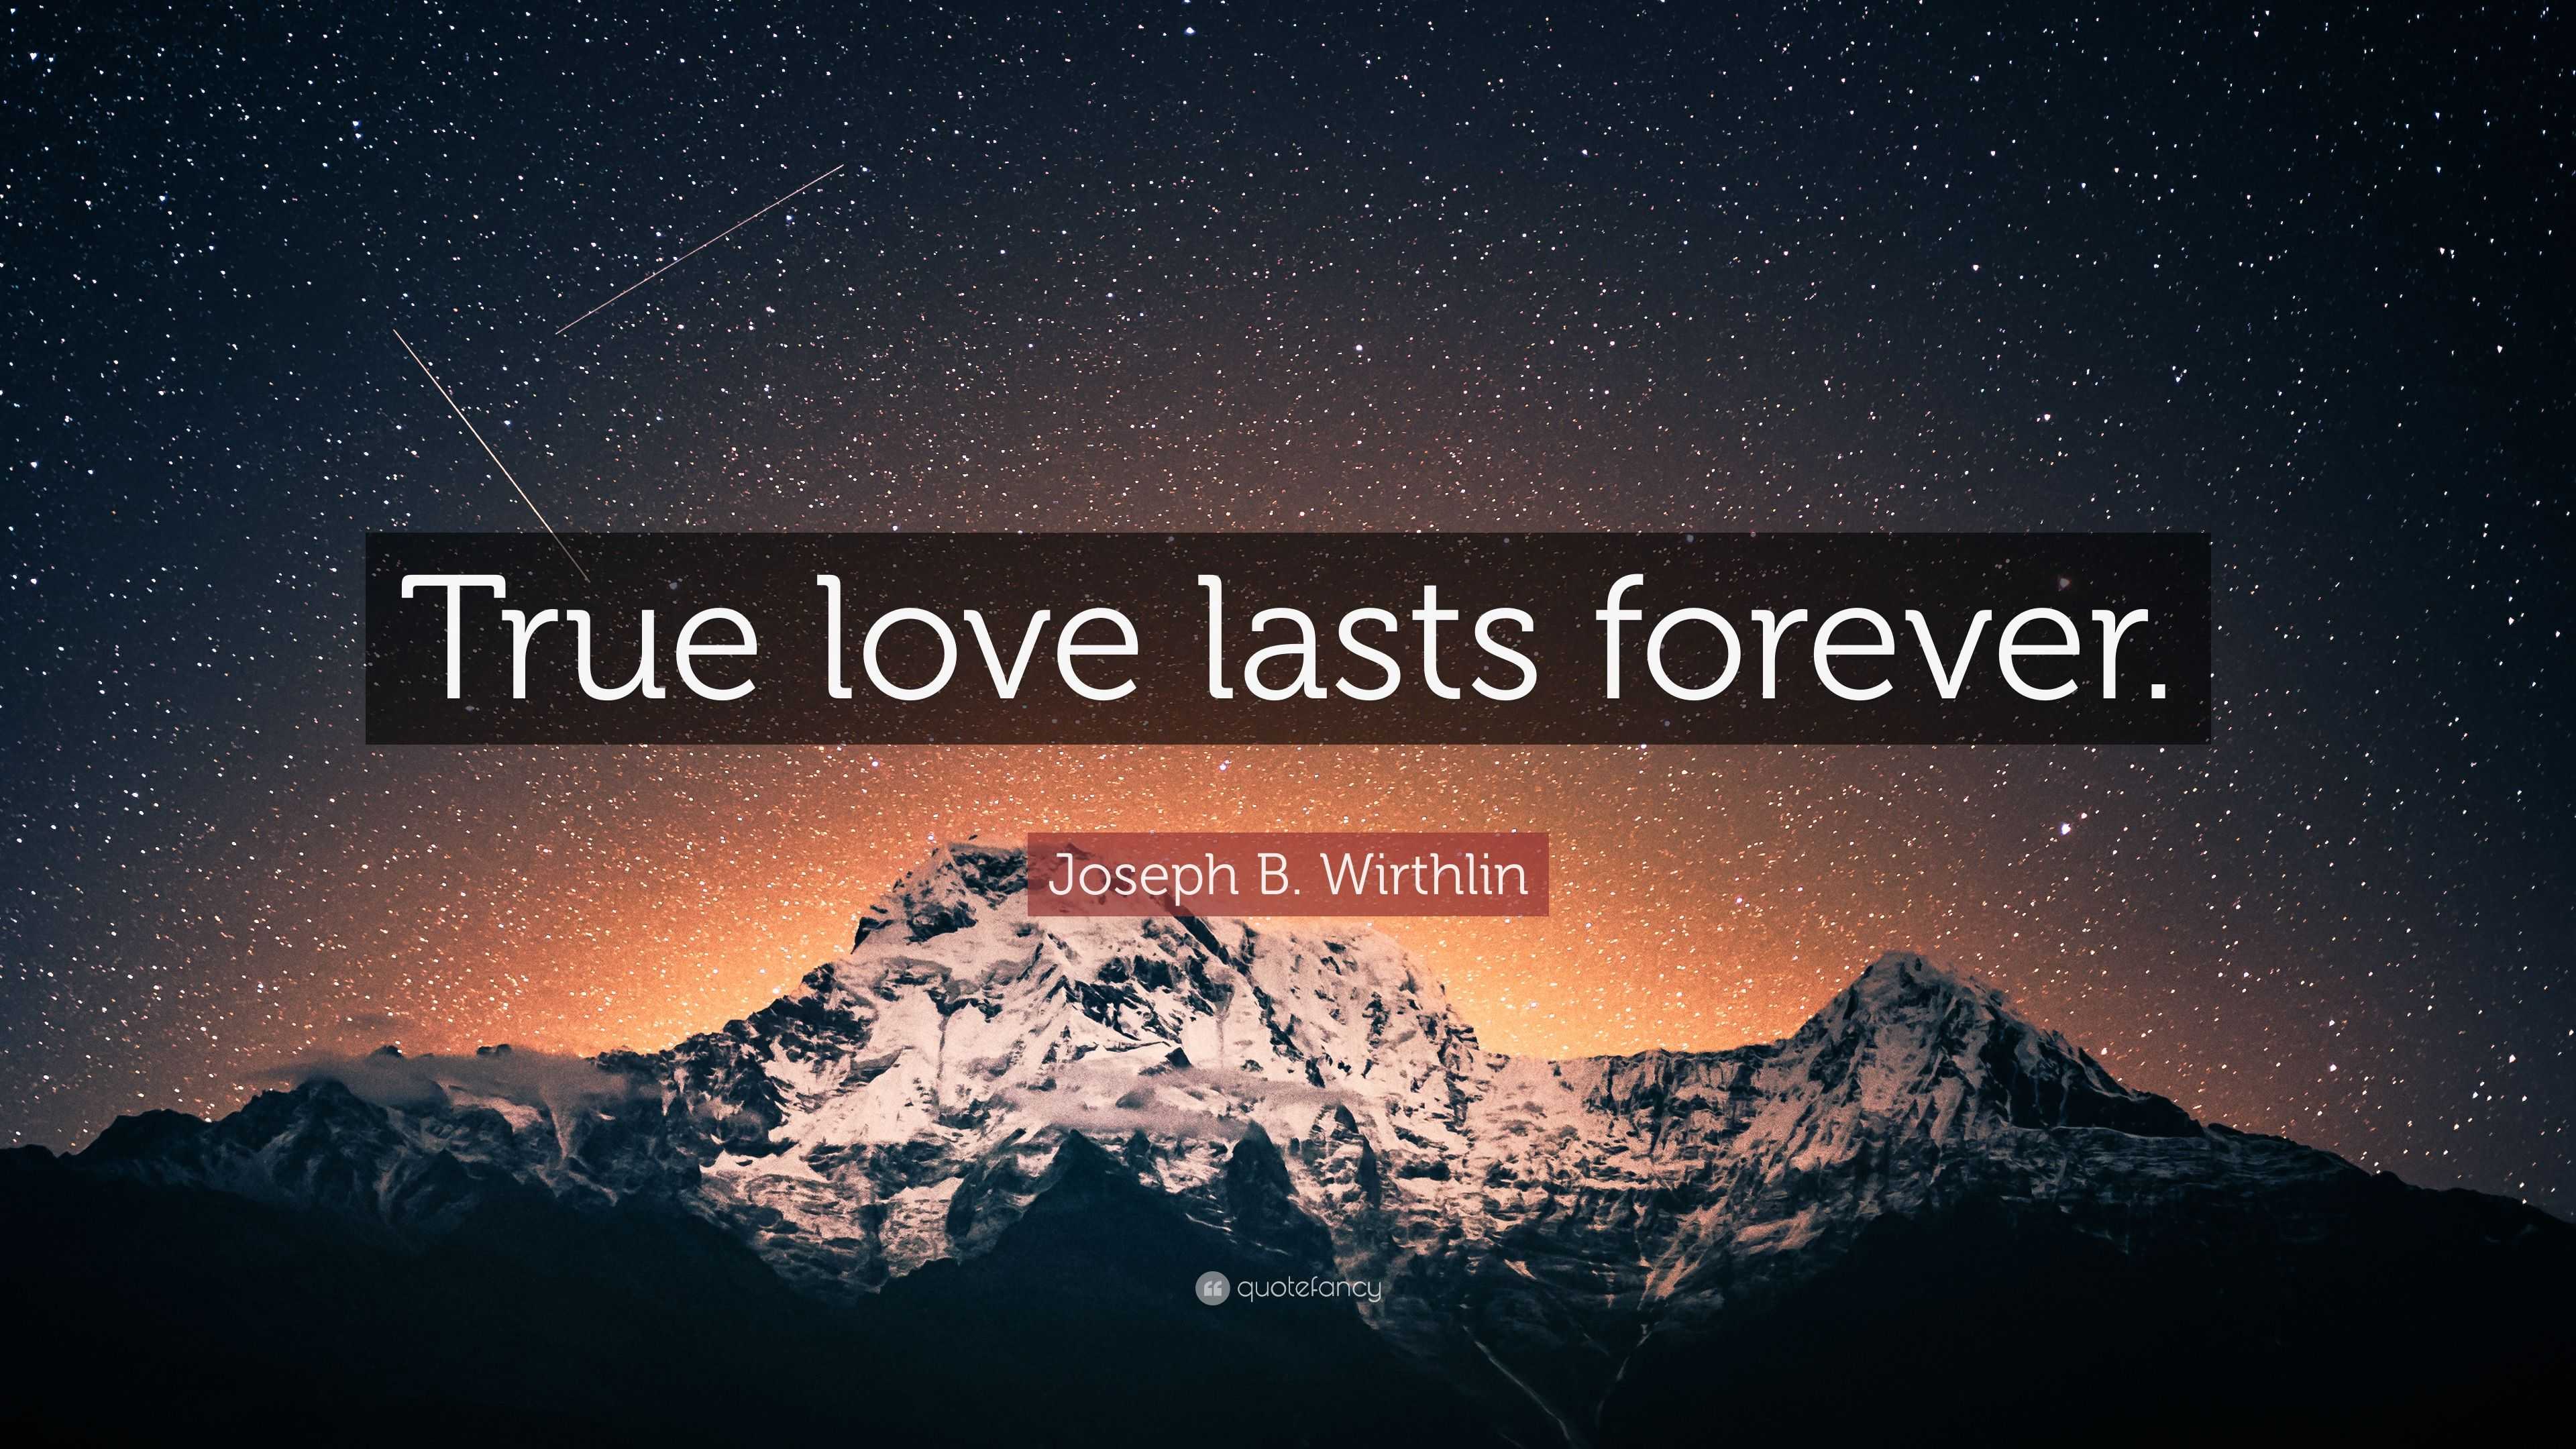 essay about true love lasts forever